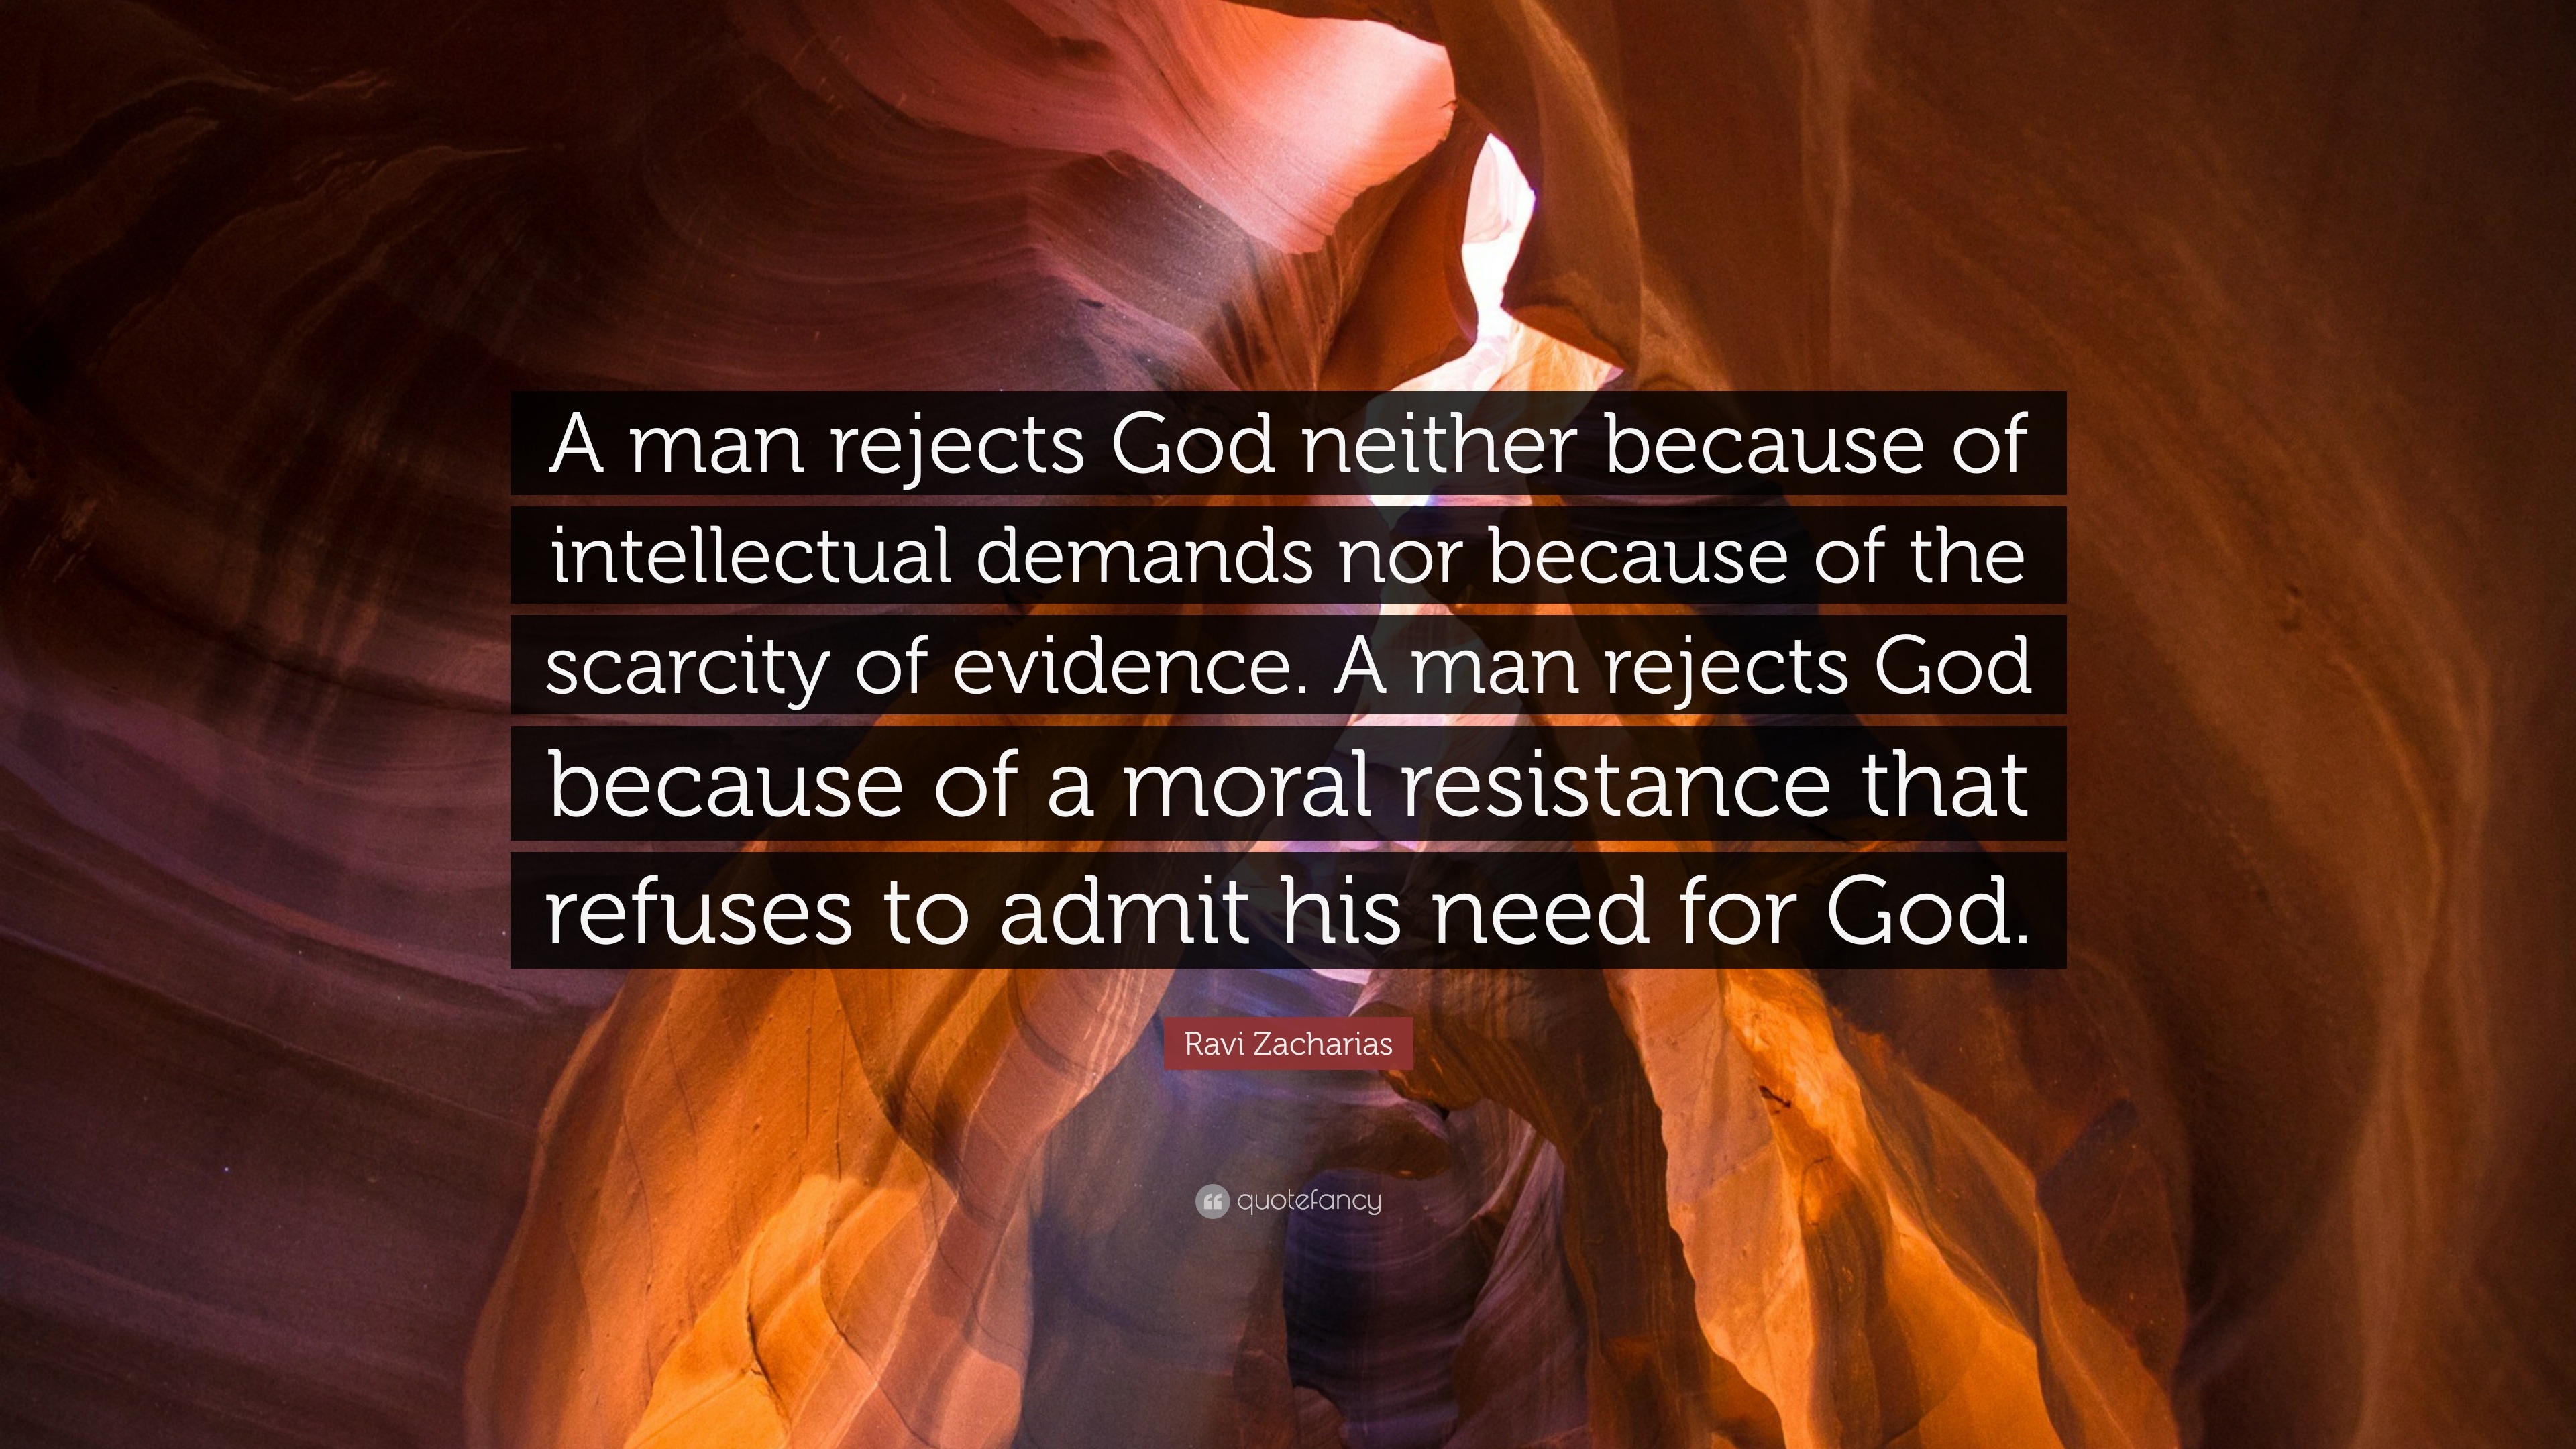 Ravi Zacharias Quote: “A man rejects God neither because of ...